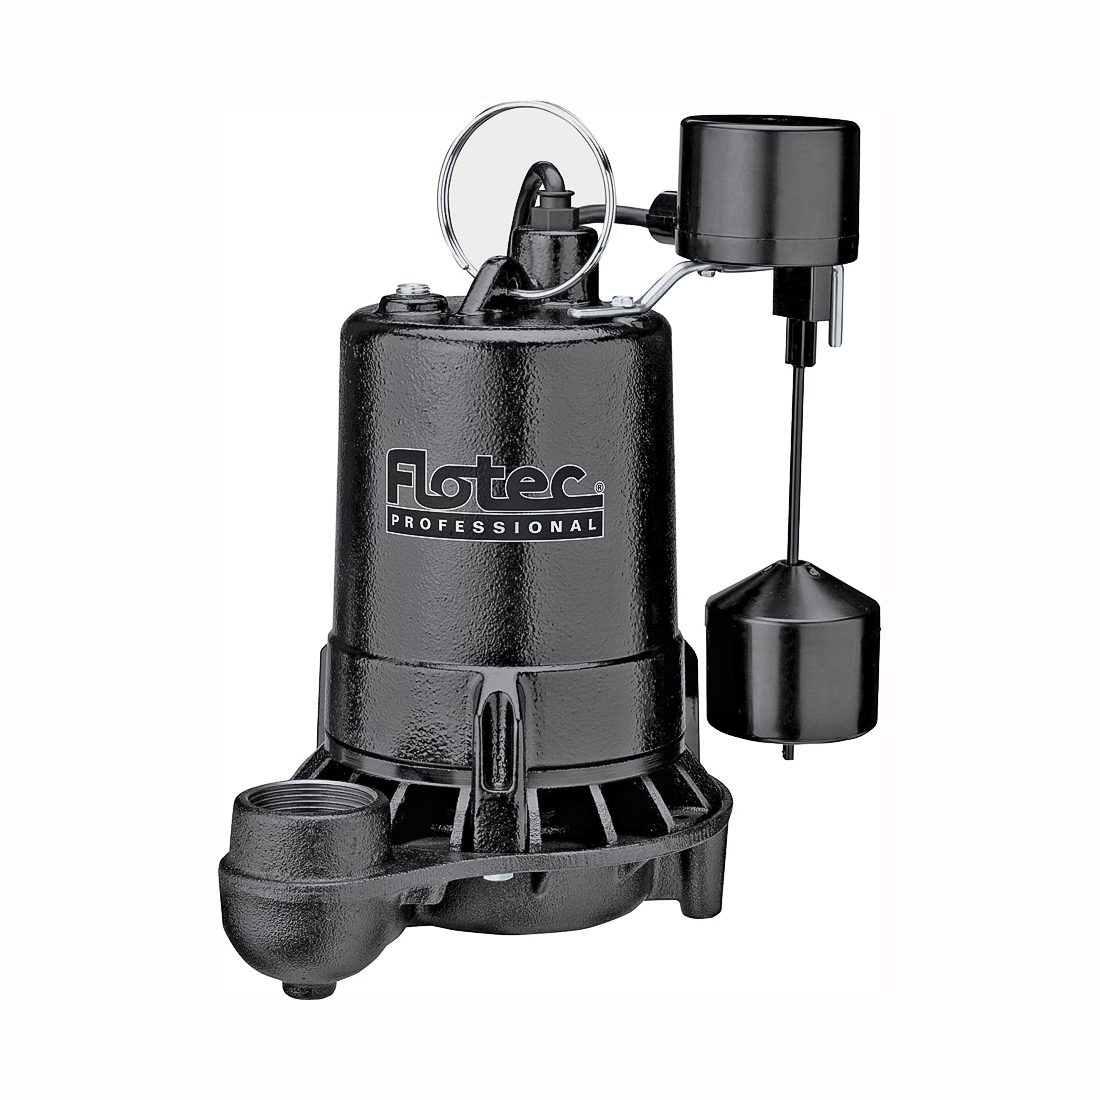 Professional Series E50VLT Sump Pump, 1-Phase, 6 A, 115 V, 0.5 hp, 1-1/2 in Outlet, 22 ft Max Head, 1020 gph